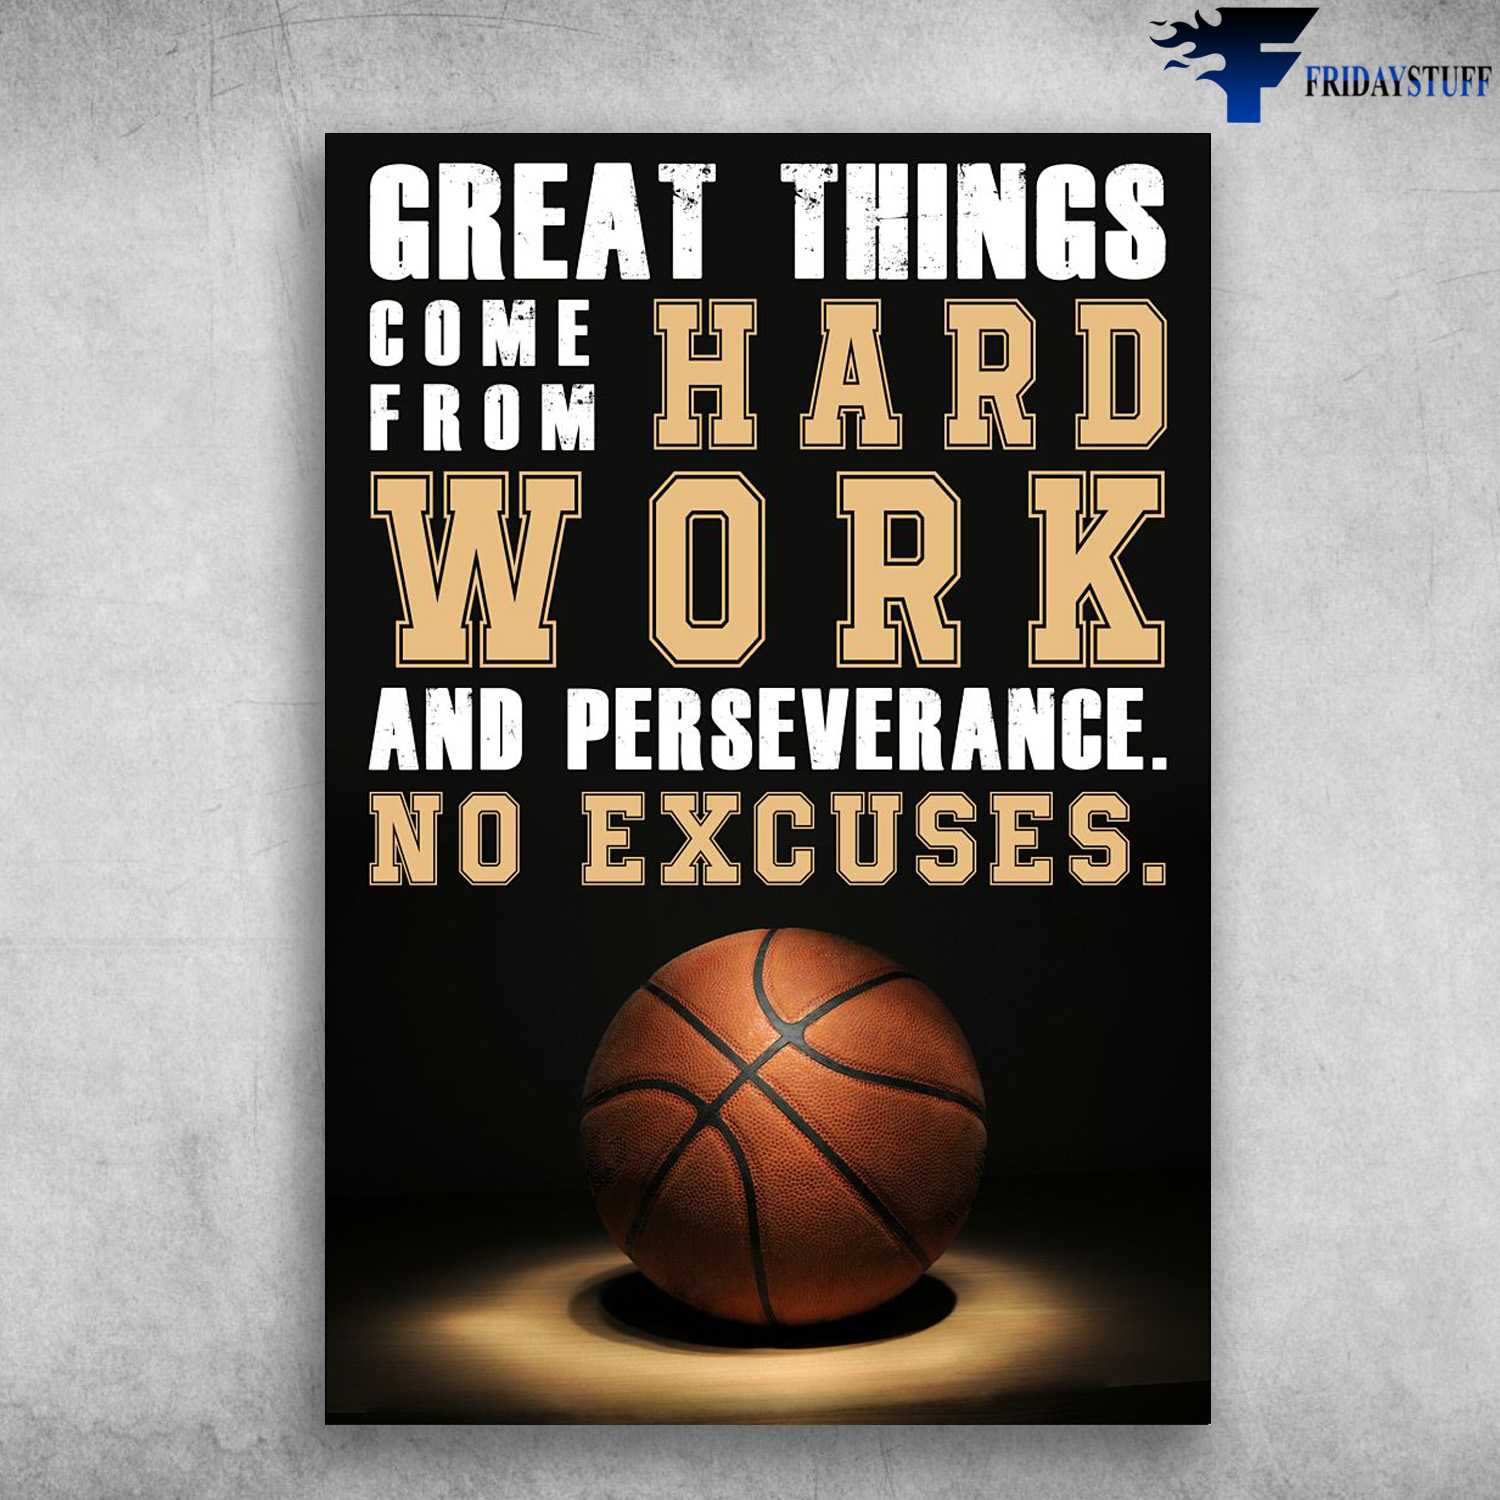 Basketball Poster, Basketball Decor, Great Things Come From Hard Work, And Perseverance, No Excuses